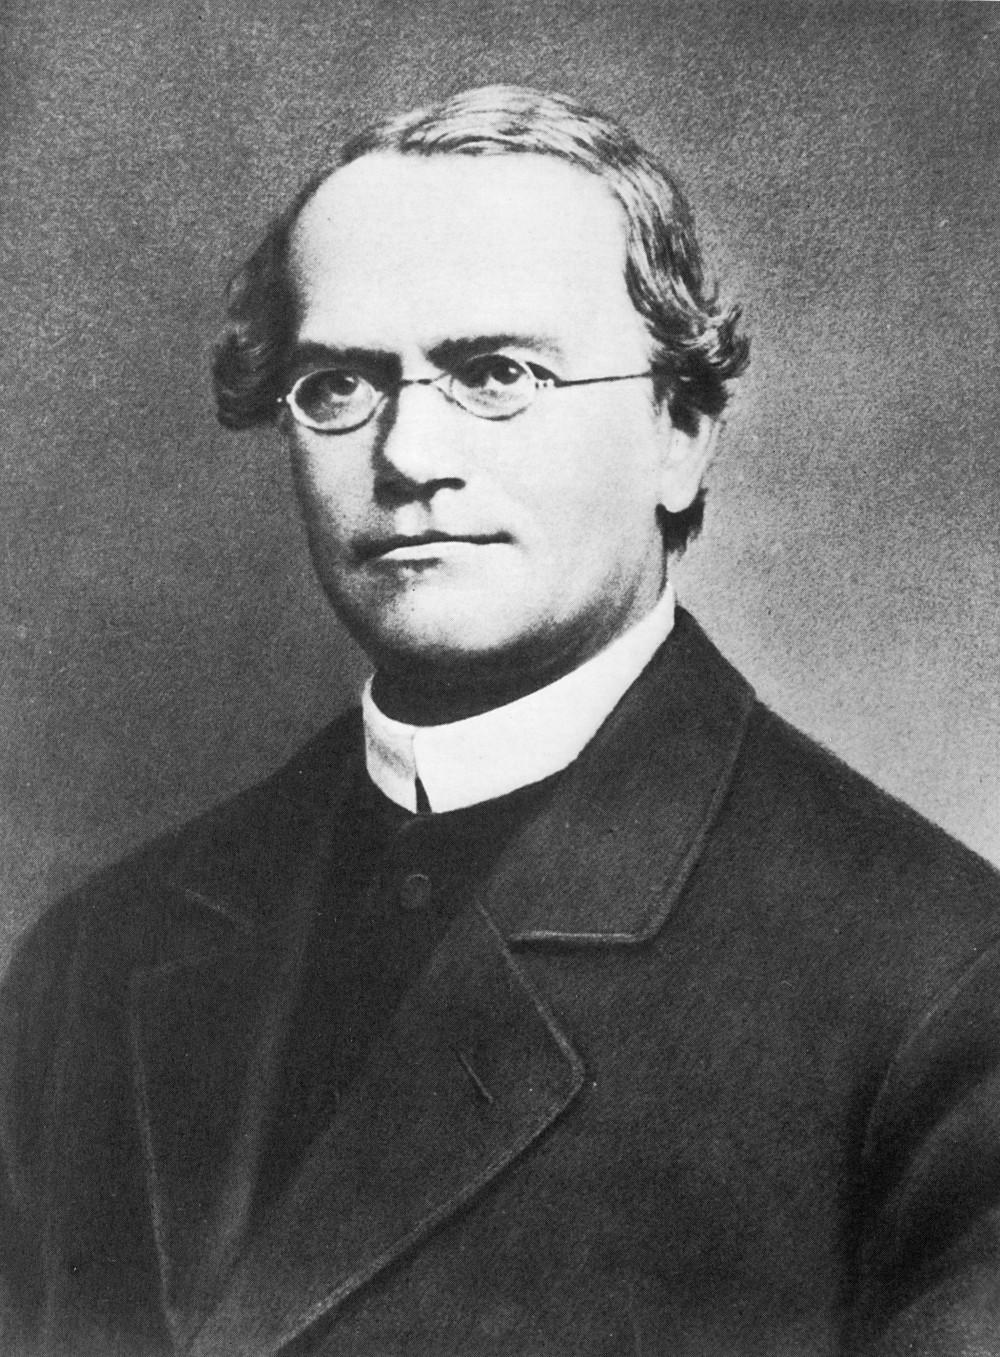 Gregor Mendel Wikipedia: Gregor Johann Mendel, 20 July 1822 6 January 1884) was a scientist, Augustinian friar and abbot of St. Thomas' Abbey in Brno, Margraviate of Moravia.